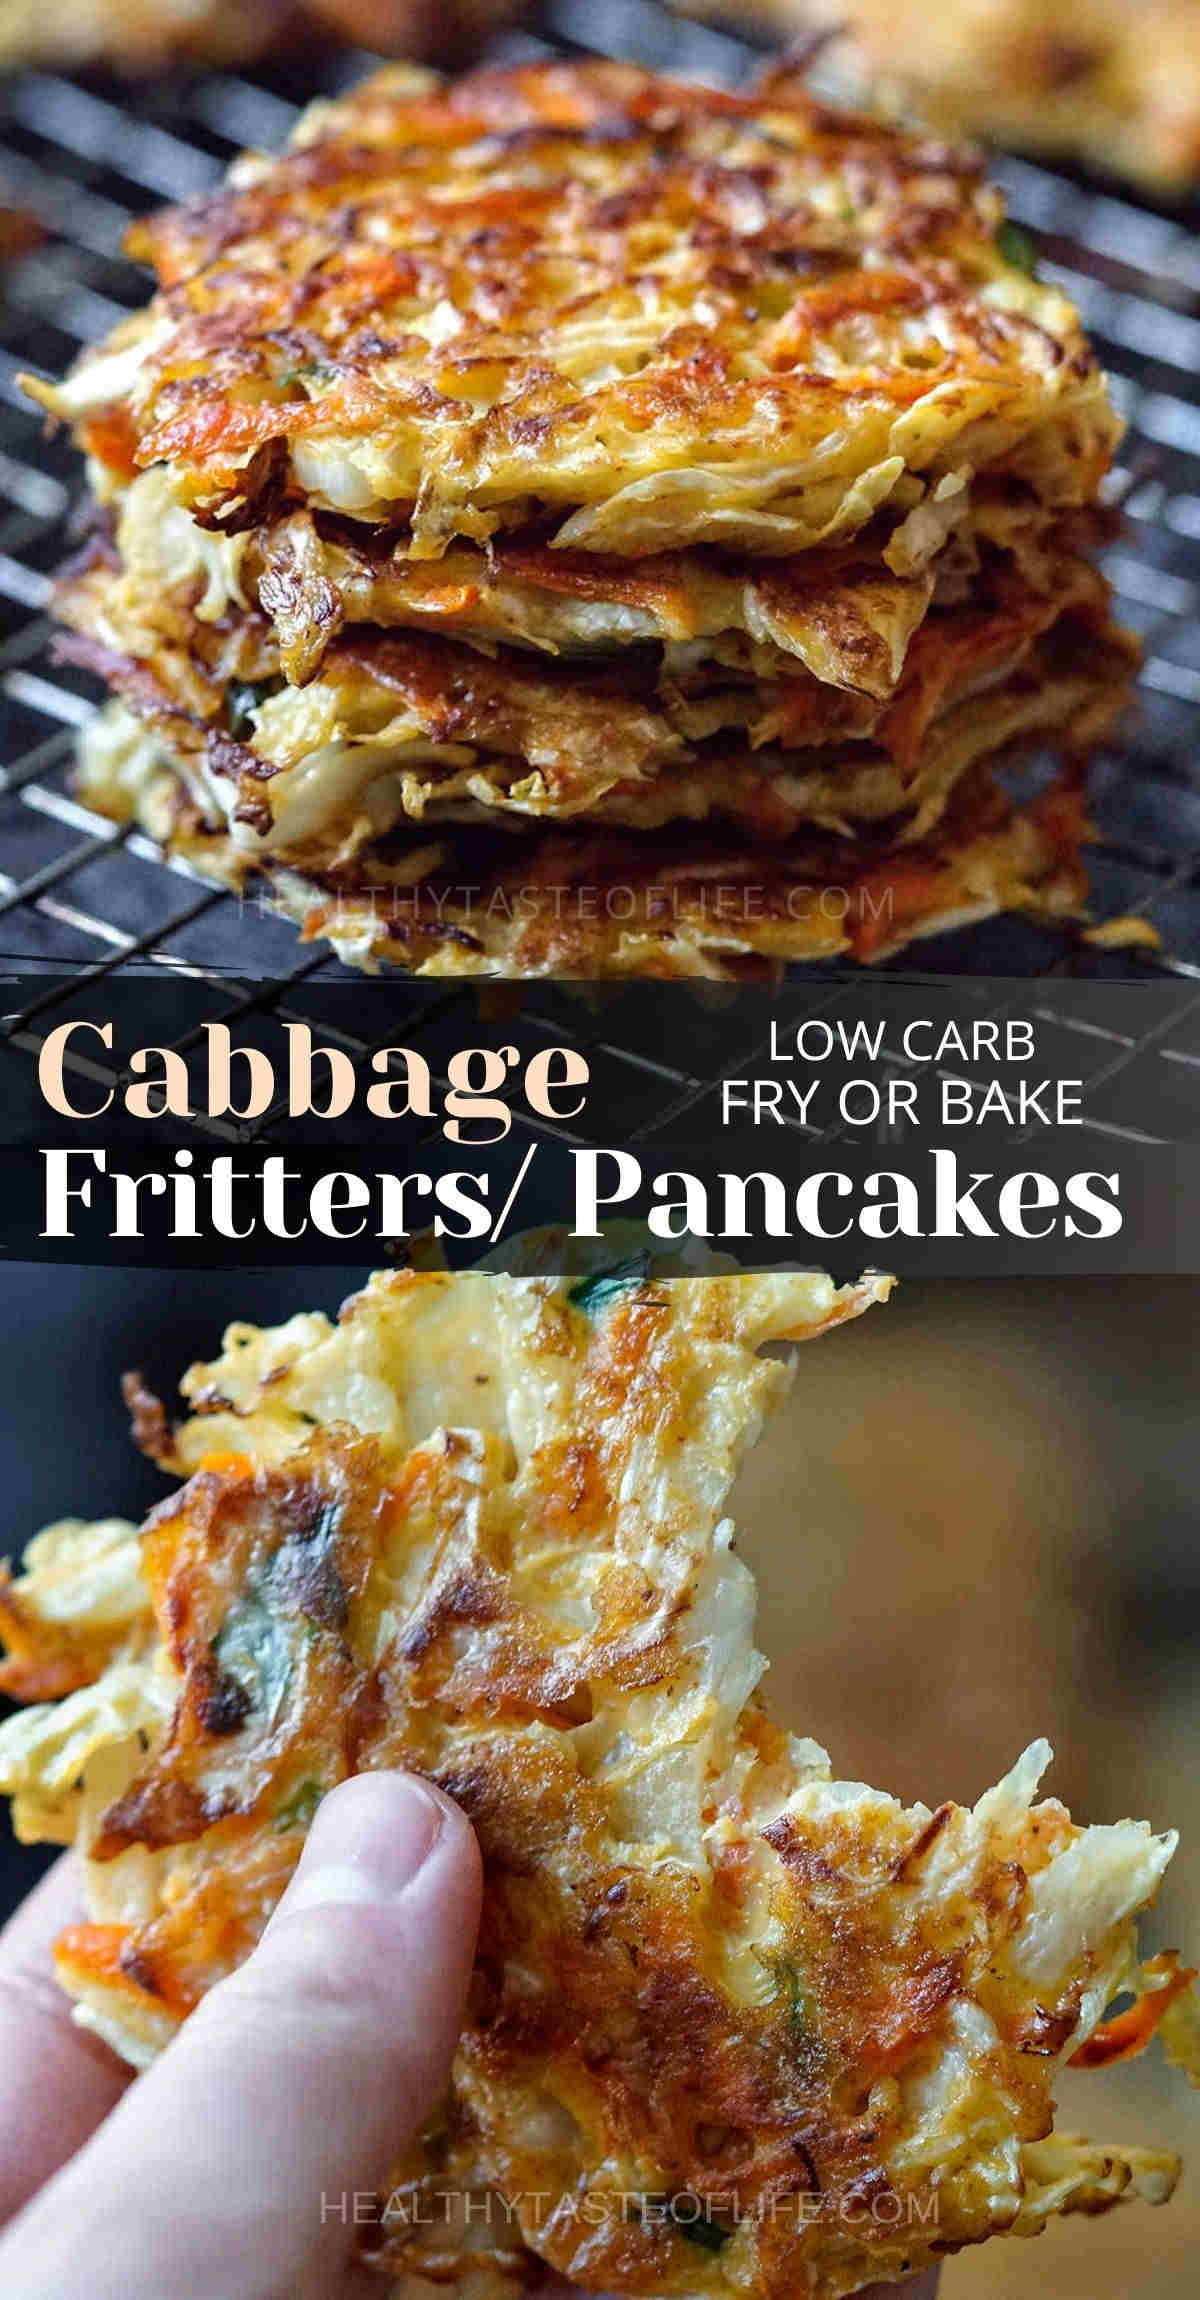 Cabbage fritters, cabbage pancakes or cabbage patties they all have similar ingredients. This cabbage fritter recipe features fresh vegetables battered with egg and a touch of flour, yielding a golden brown top once fried. Flavored with herbs and spices these cabbage fritters can be enjoyed as side dish or appetizer. Serve these vegetable pancakes warm or cold. #cabbagefritters #cabbagepancakes #cabbagepatties #healthy #friedcabbage #cabbageappetizer #Okonomiyaki #vegetablepancakes